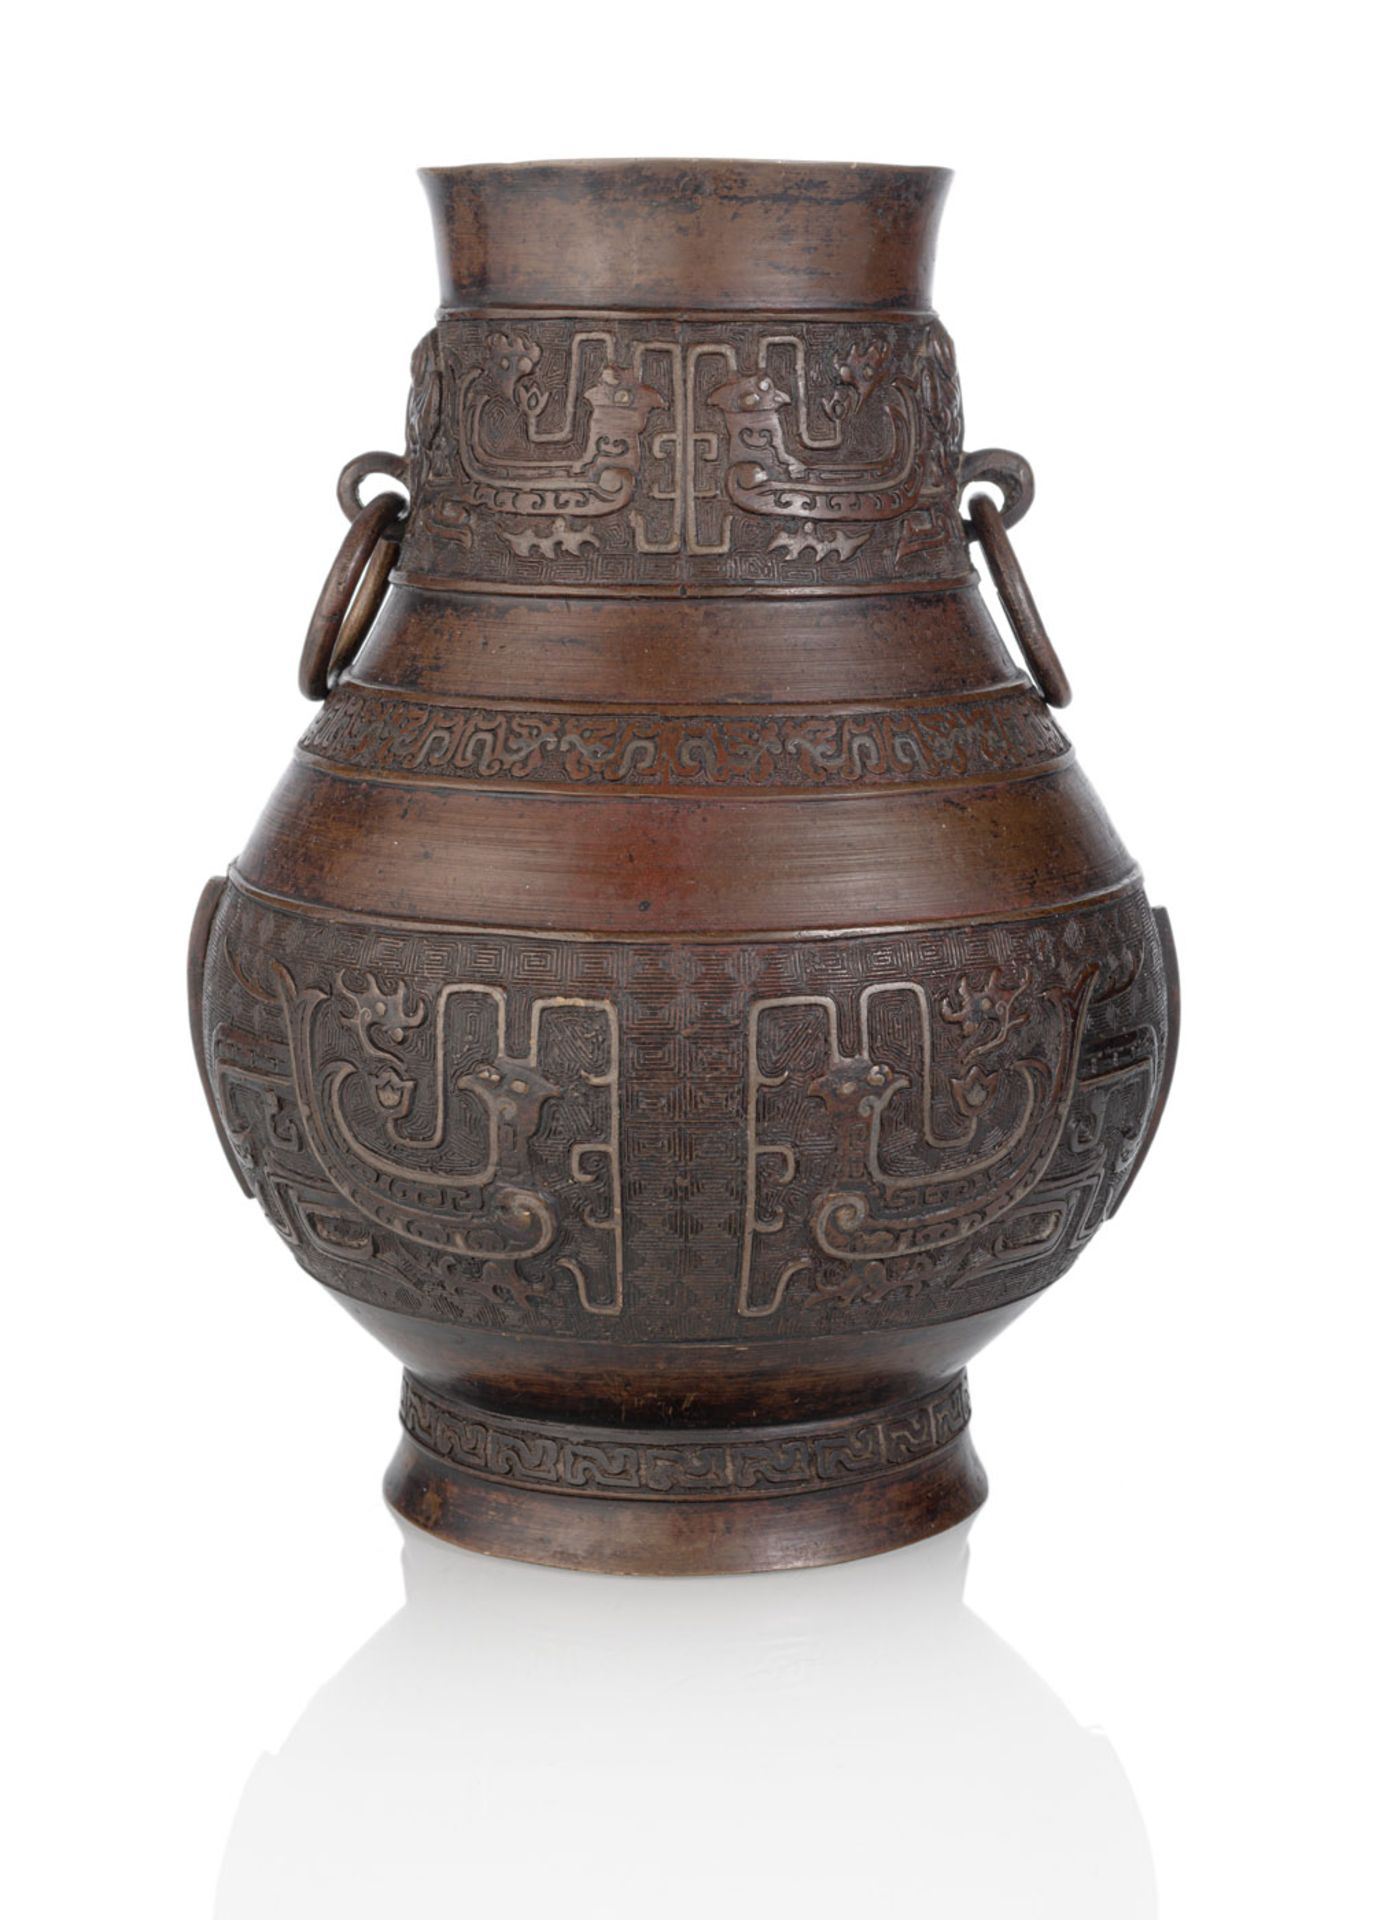 A SILVER-INLAID HU-SHAPED BRONZE VASE IN ARCHAIC STYLE